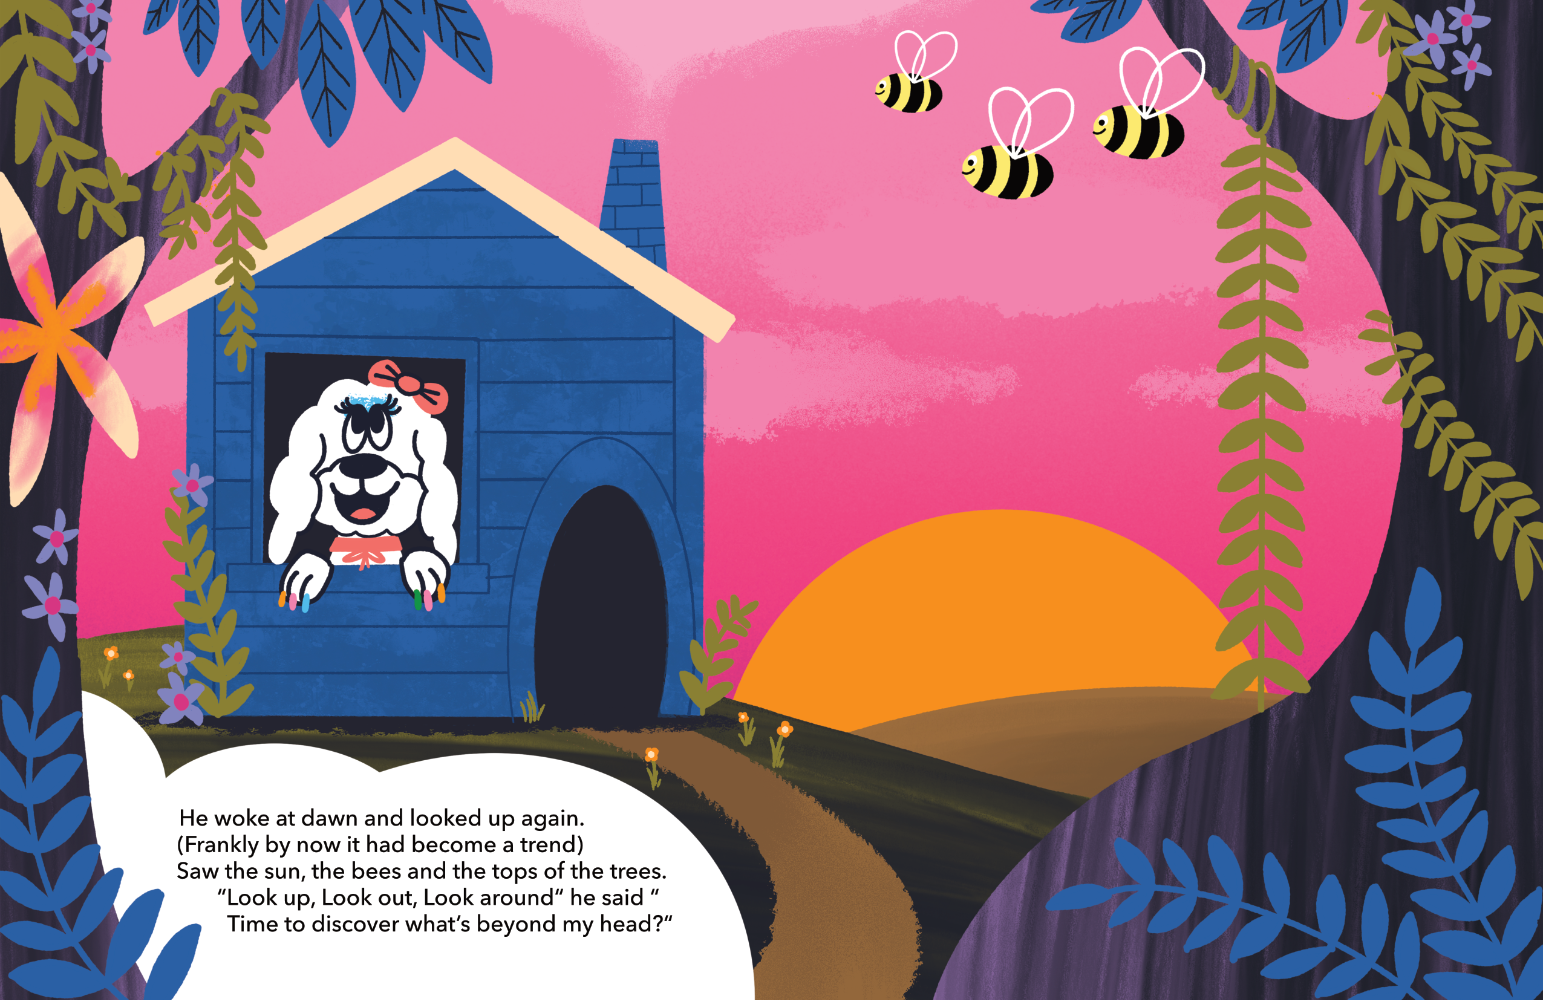 whats-beyond-may-head-childrens-book-page-spread-1-lars-madsen-illustration.png